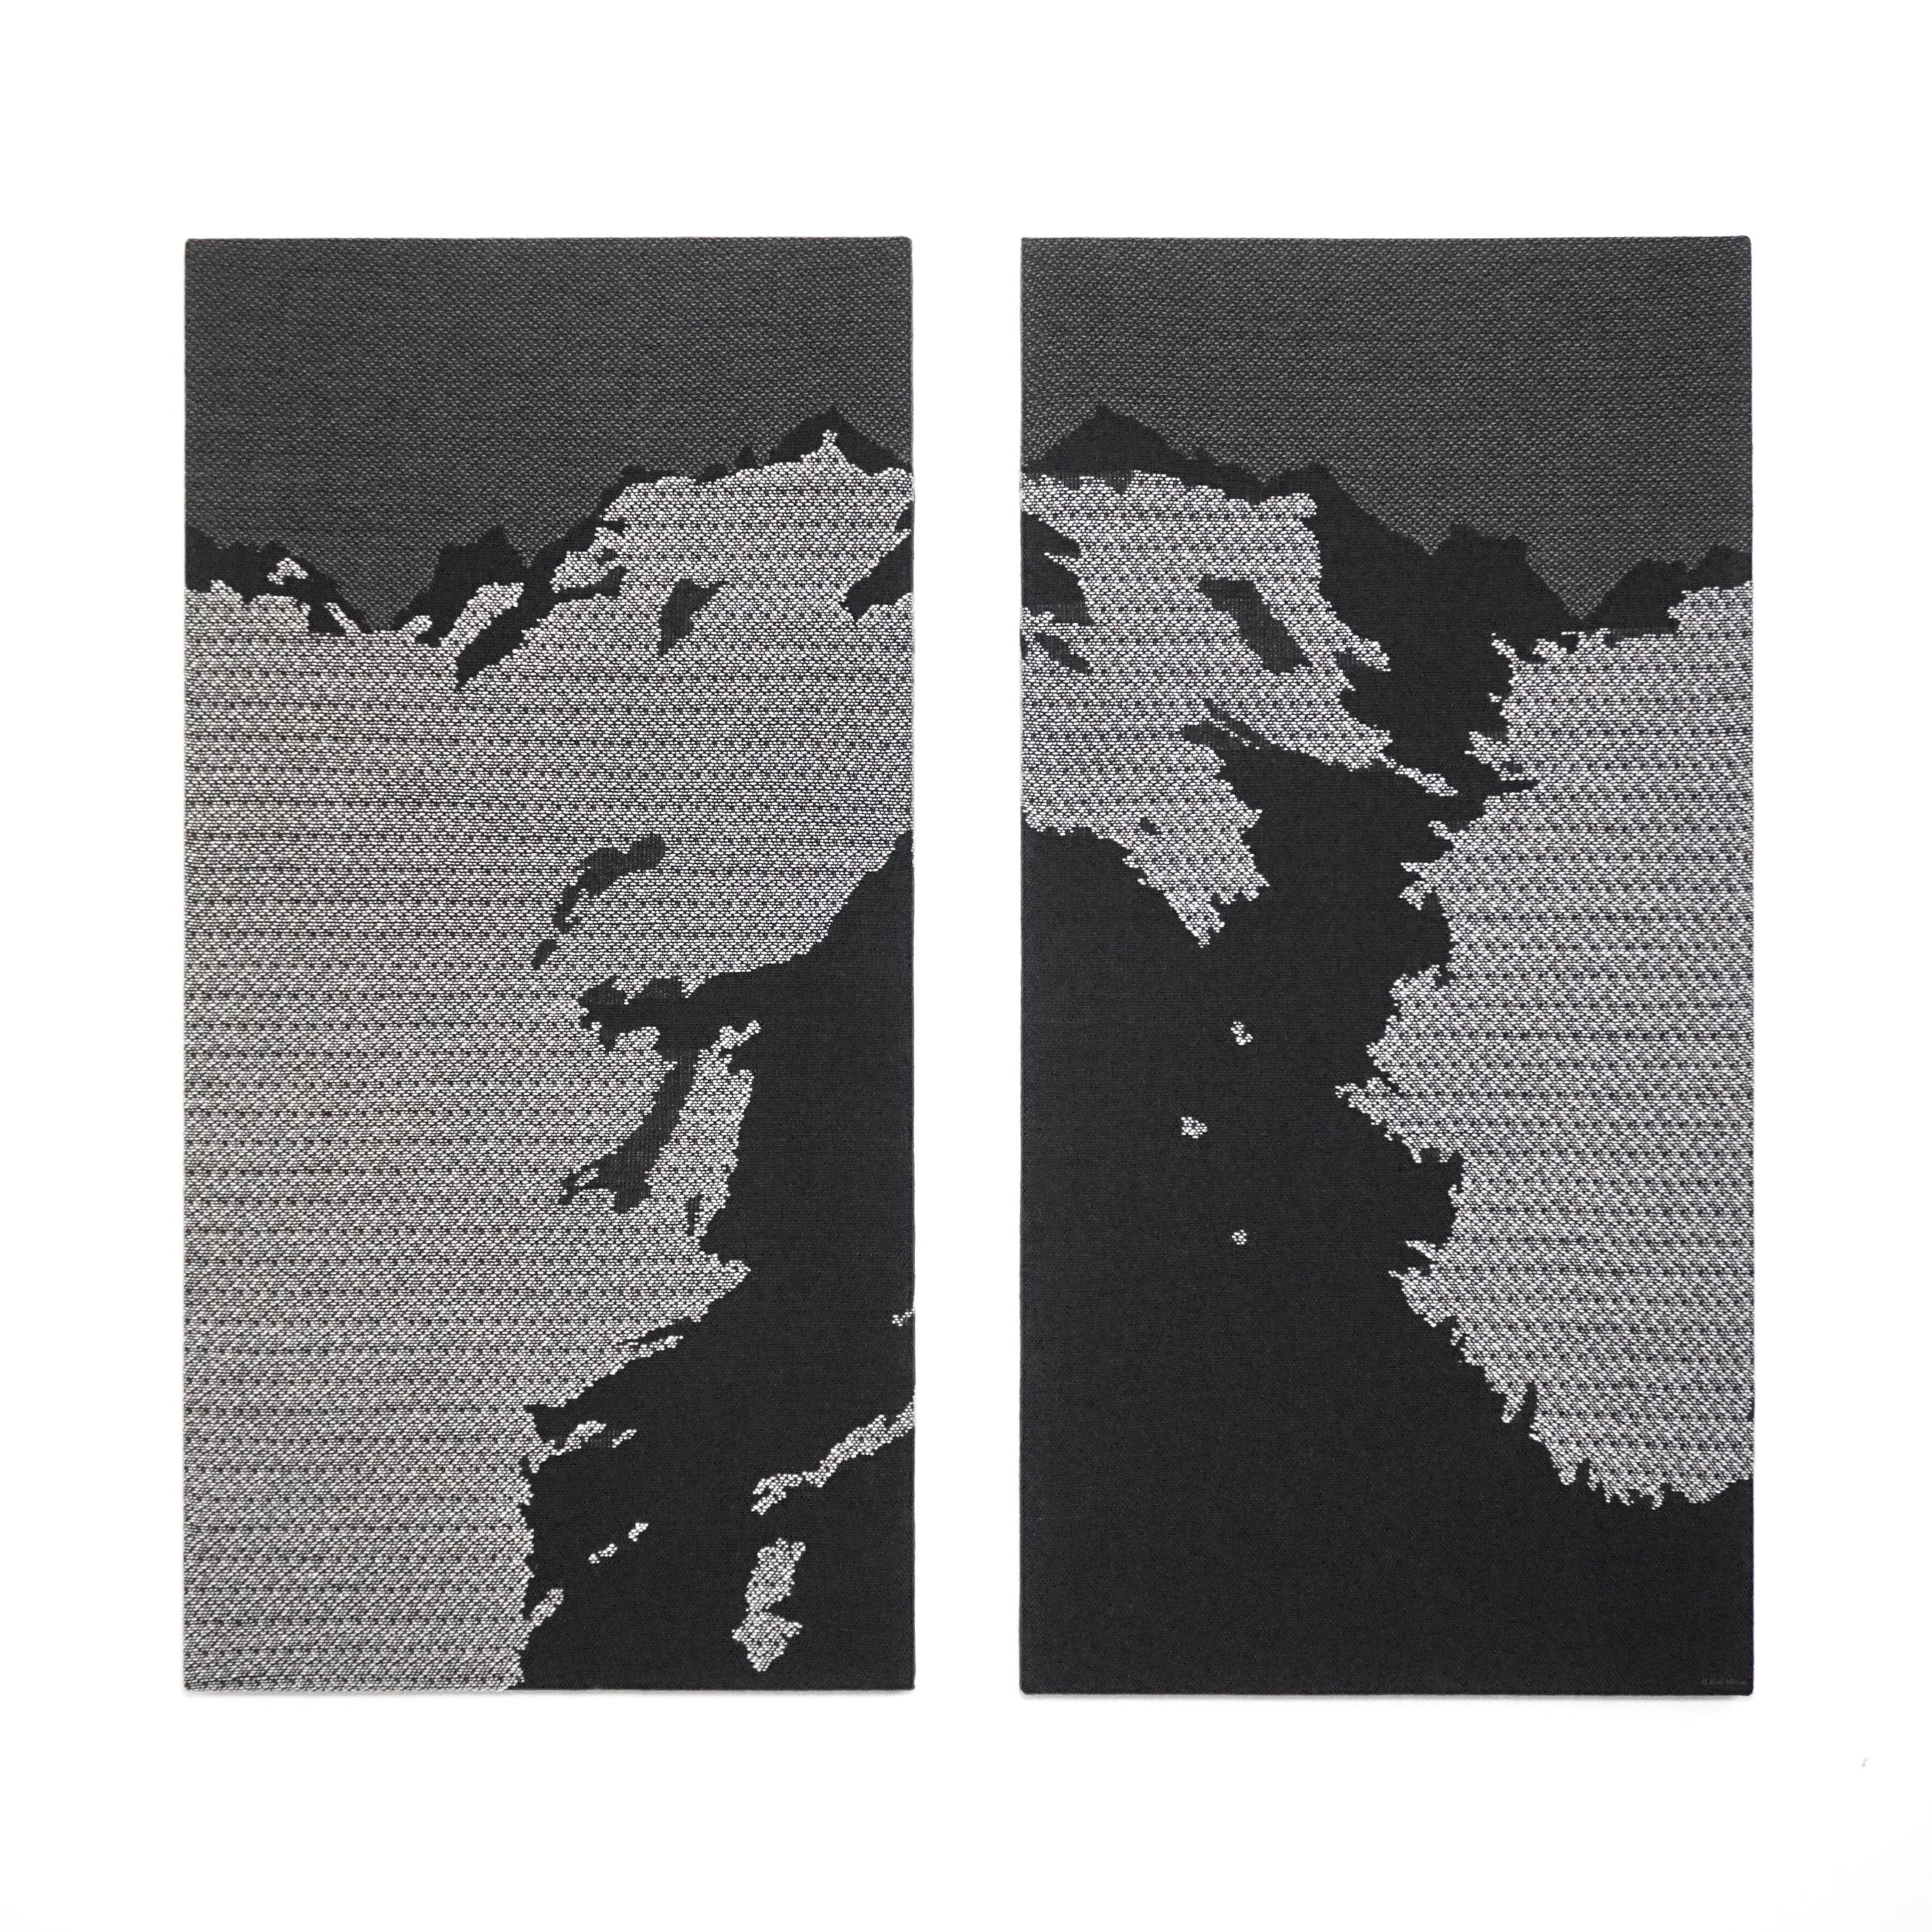  Melting Reflections: Eel Glacier Over One Half Century 2023 Handwoven cotton and wool 40” x 20” each, two panels 